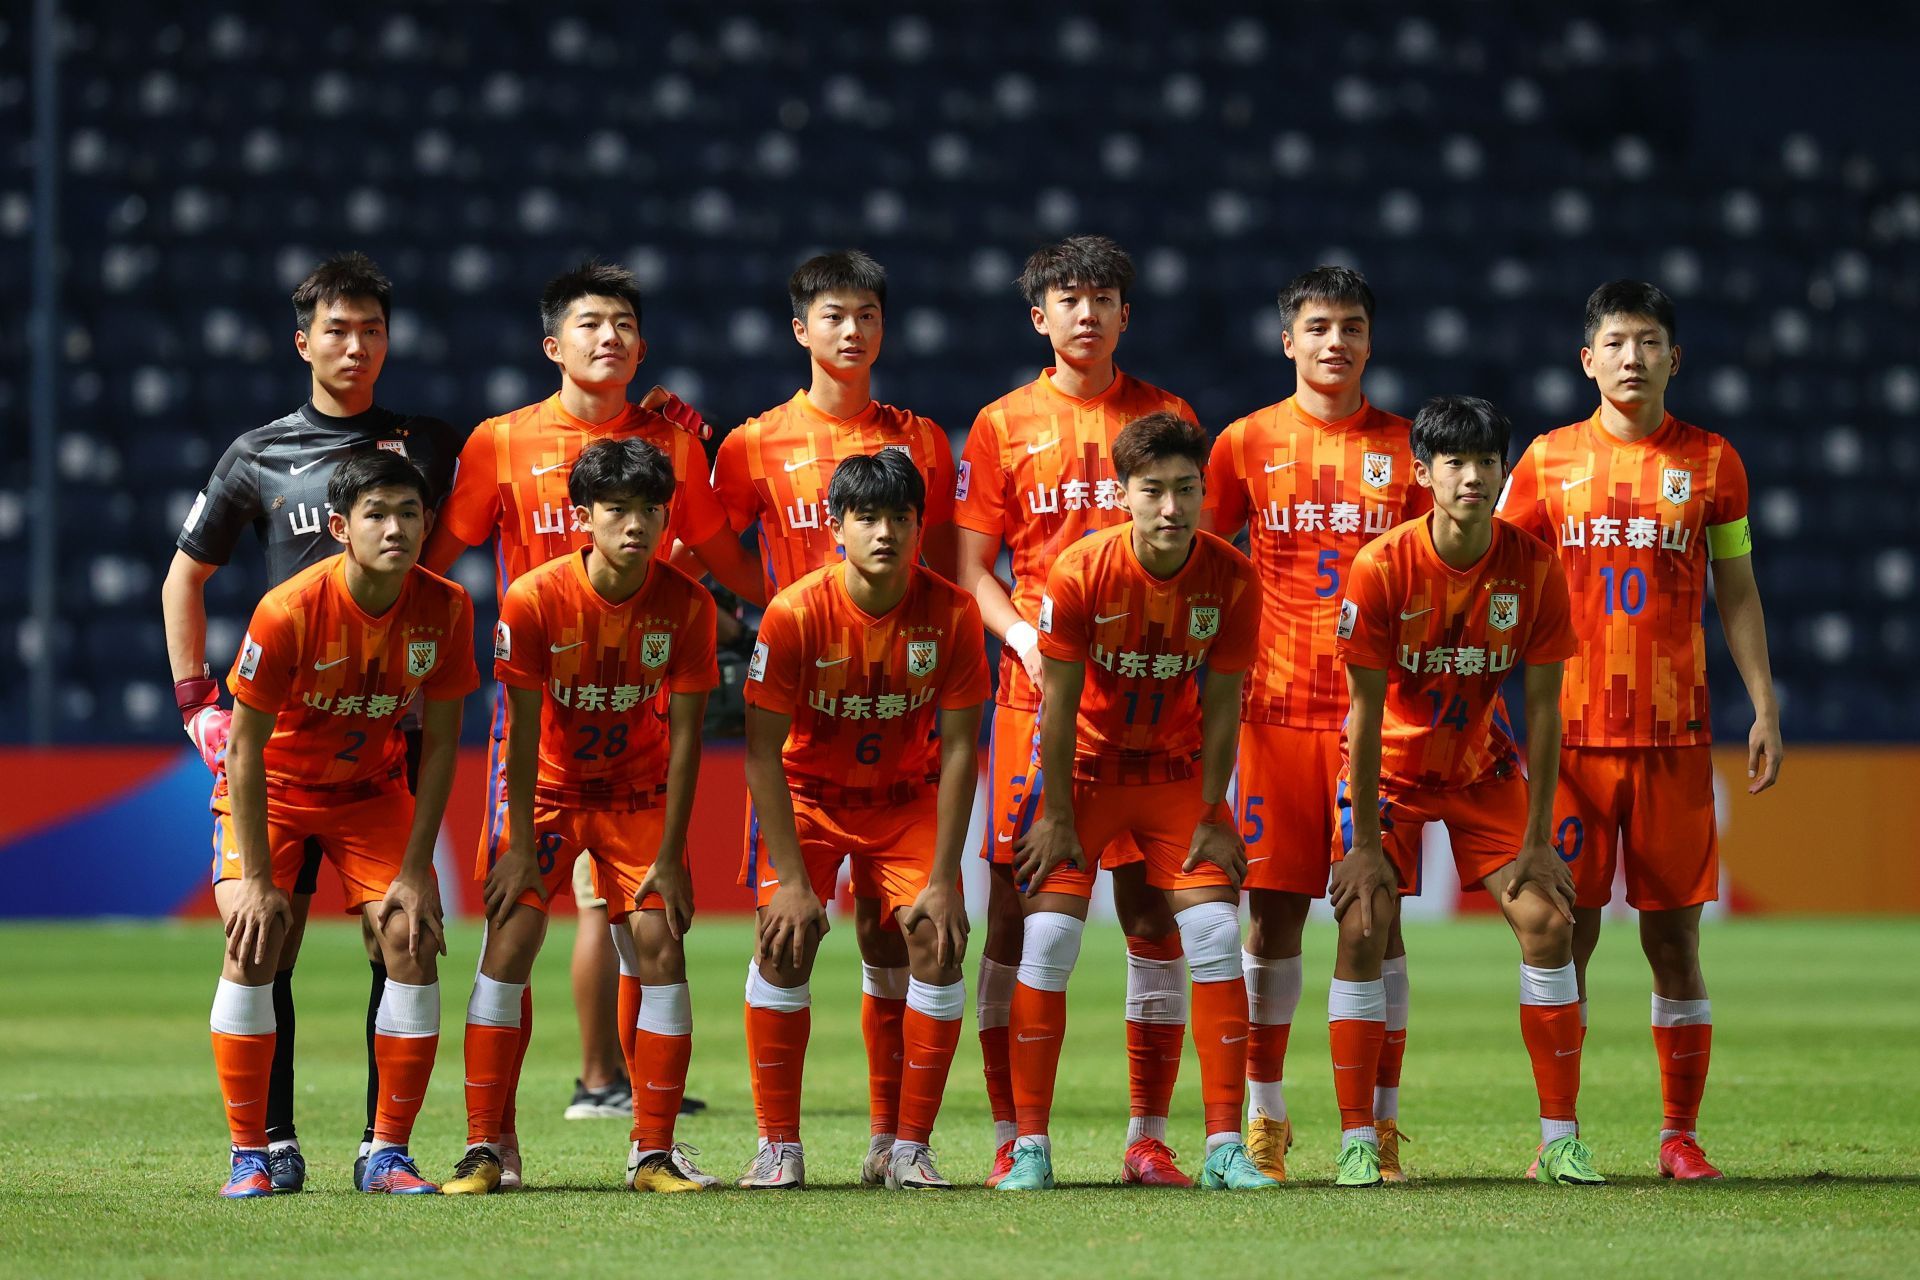 Shandong will aim to leapfrog their opponents with a win